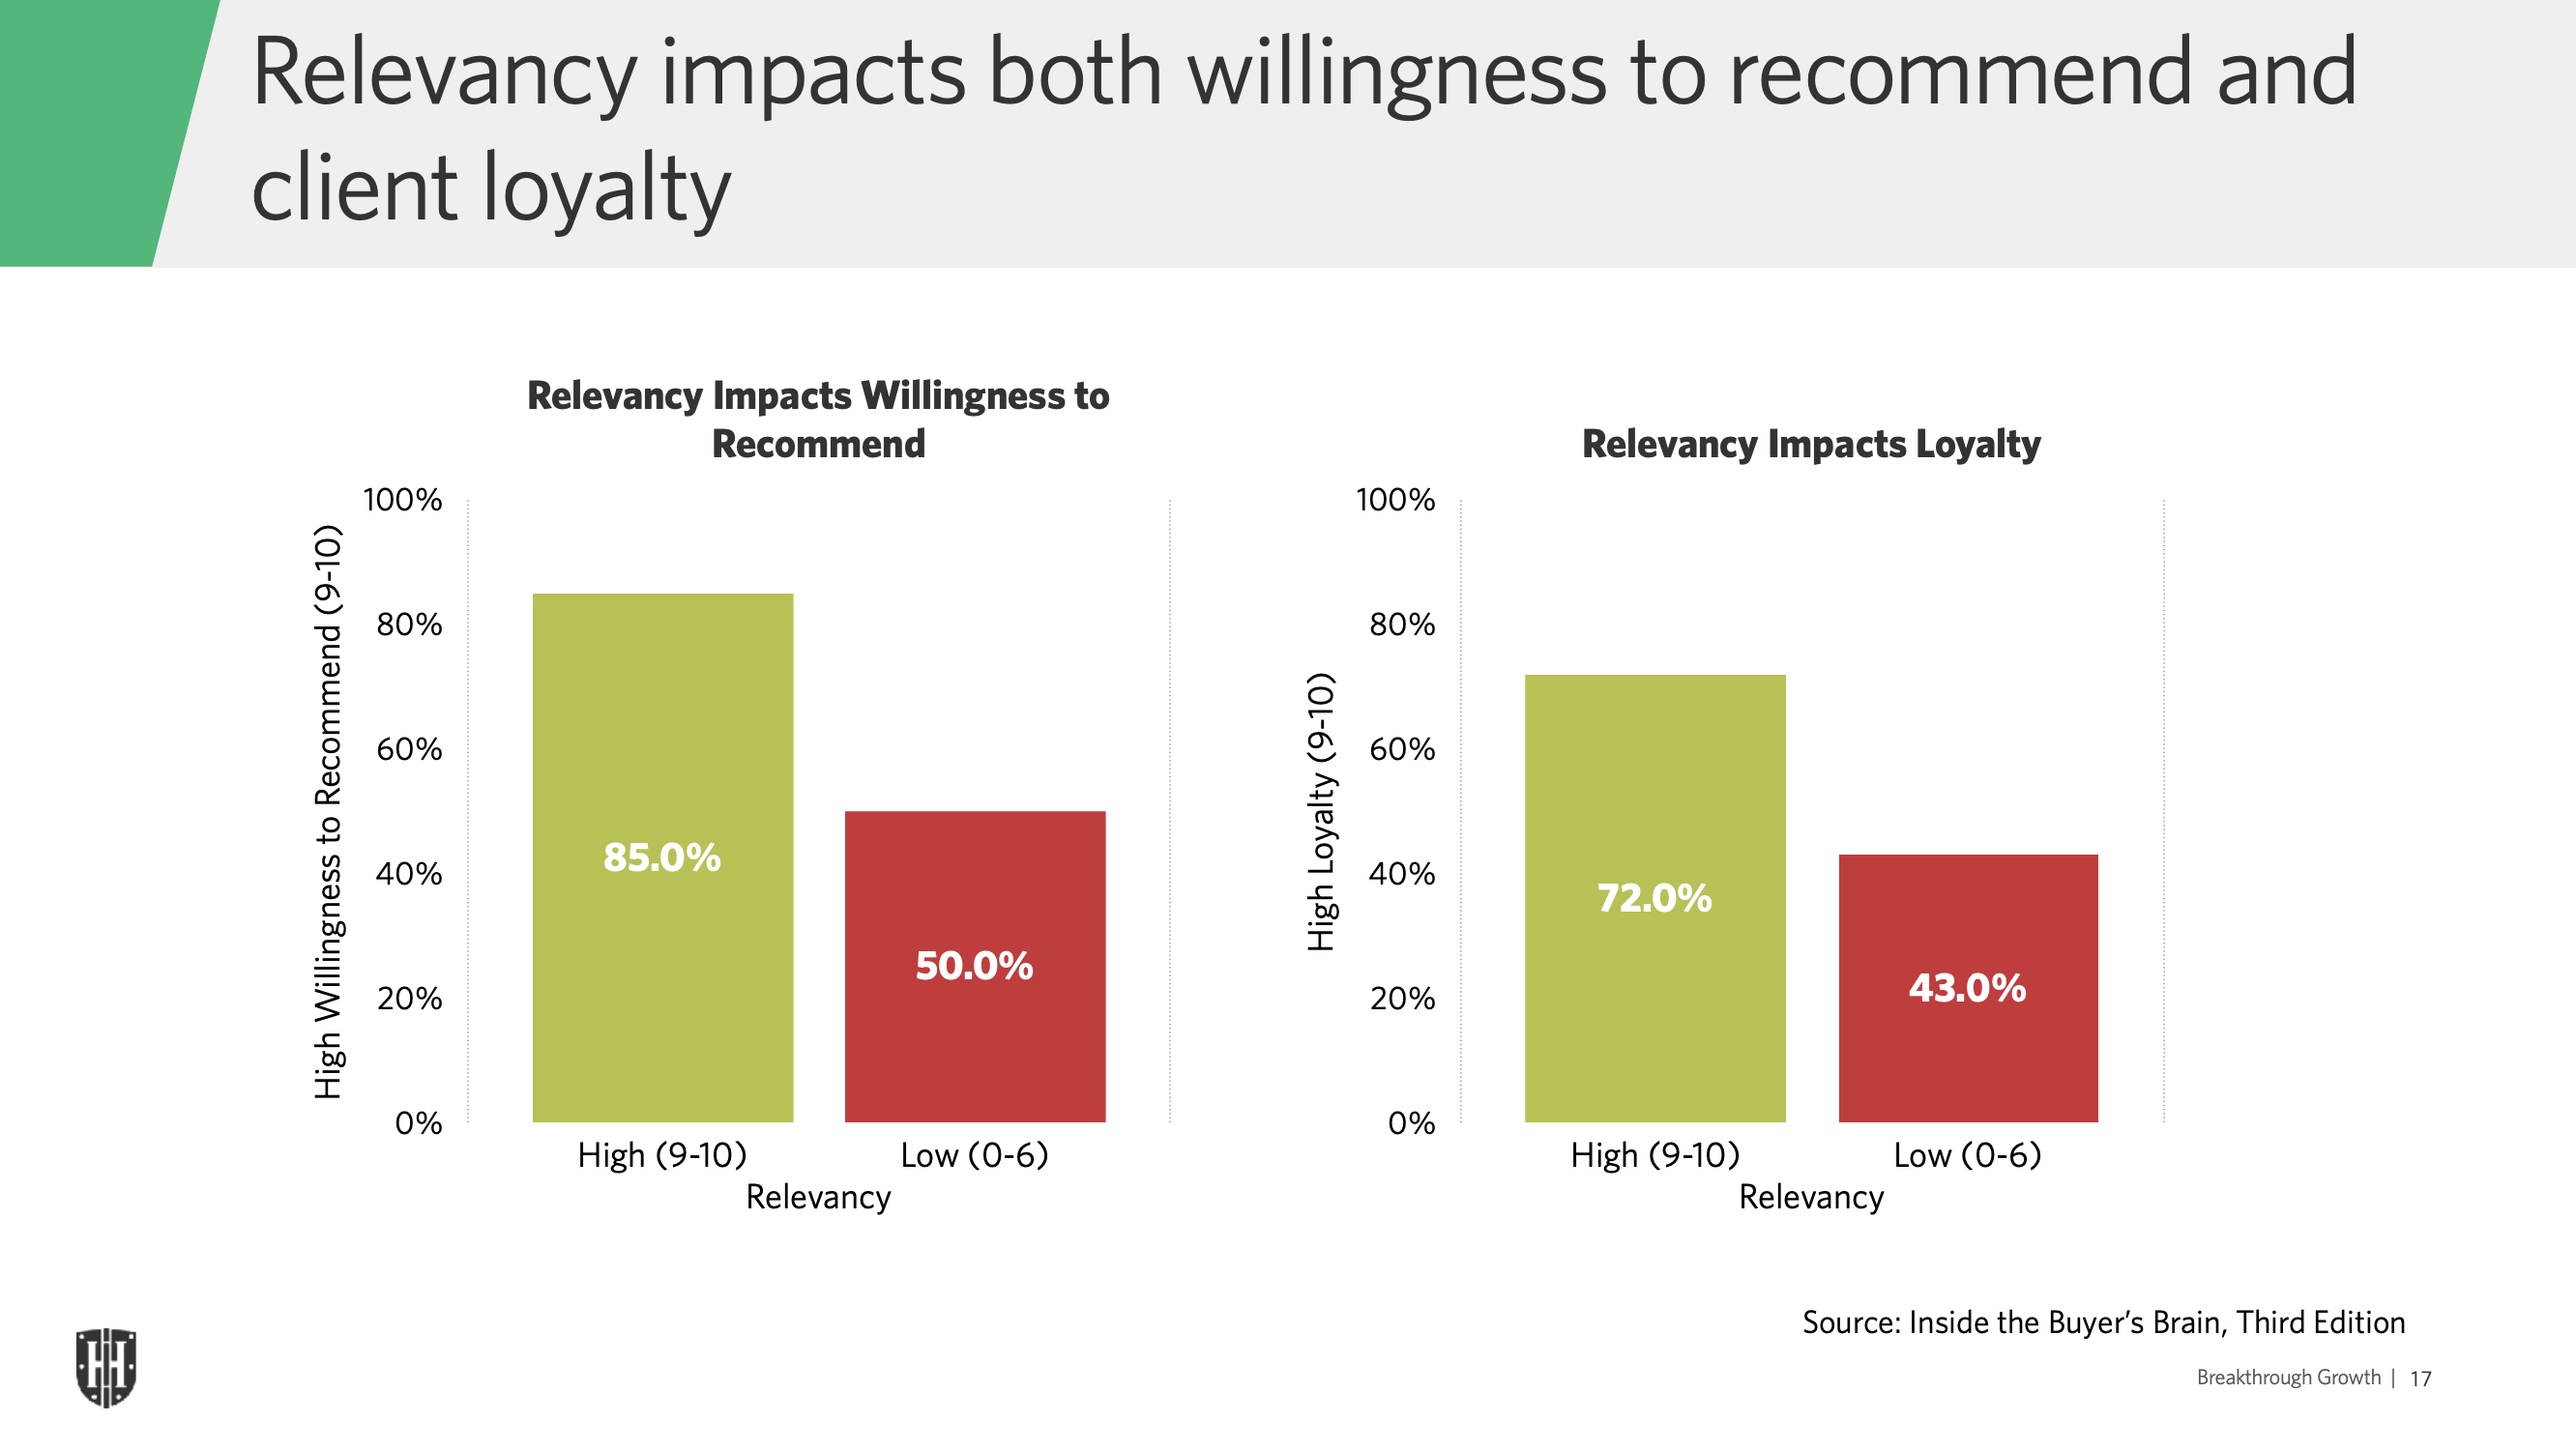 Relevance imacts client loyalty